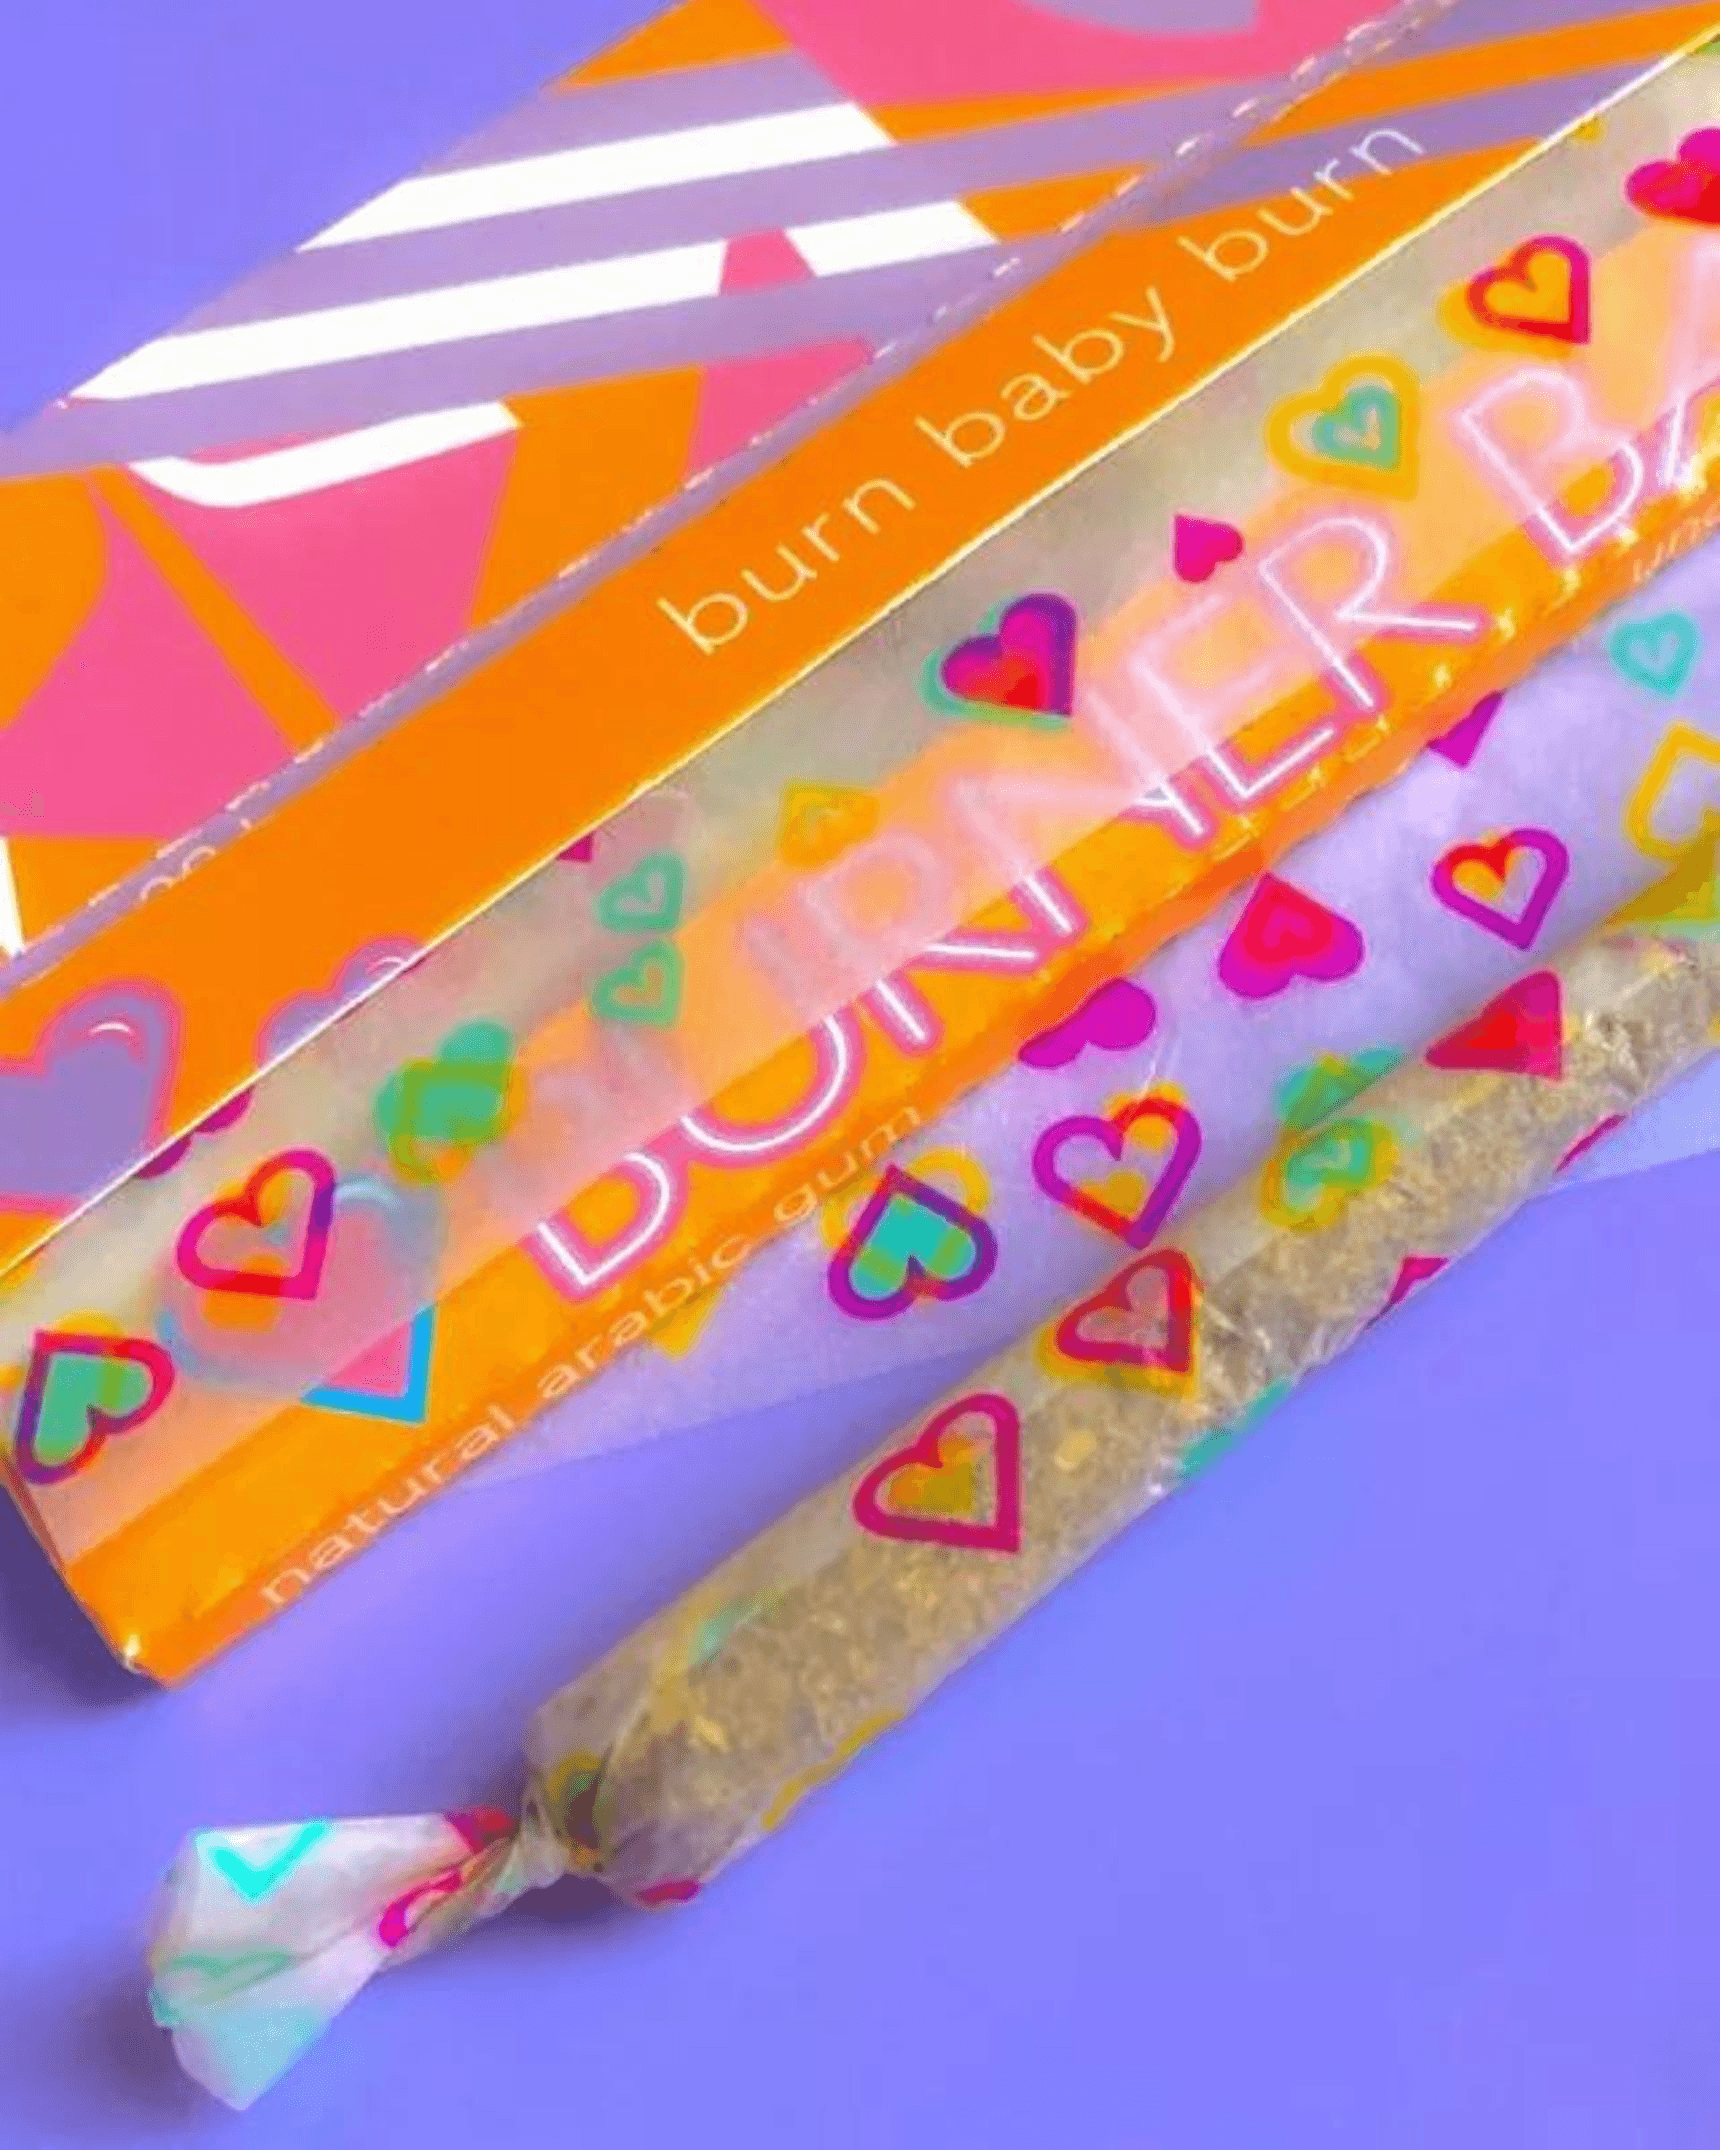 A joint with Heart-printed king sized rolling papers.